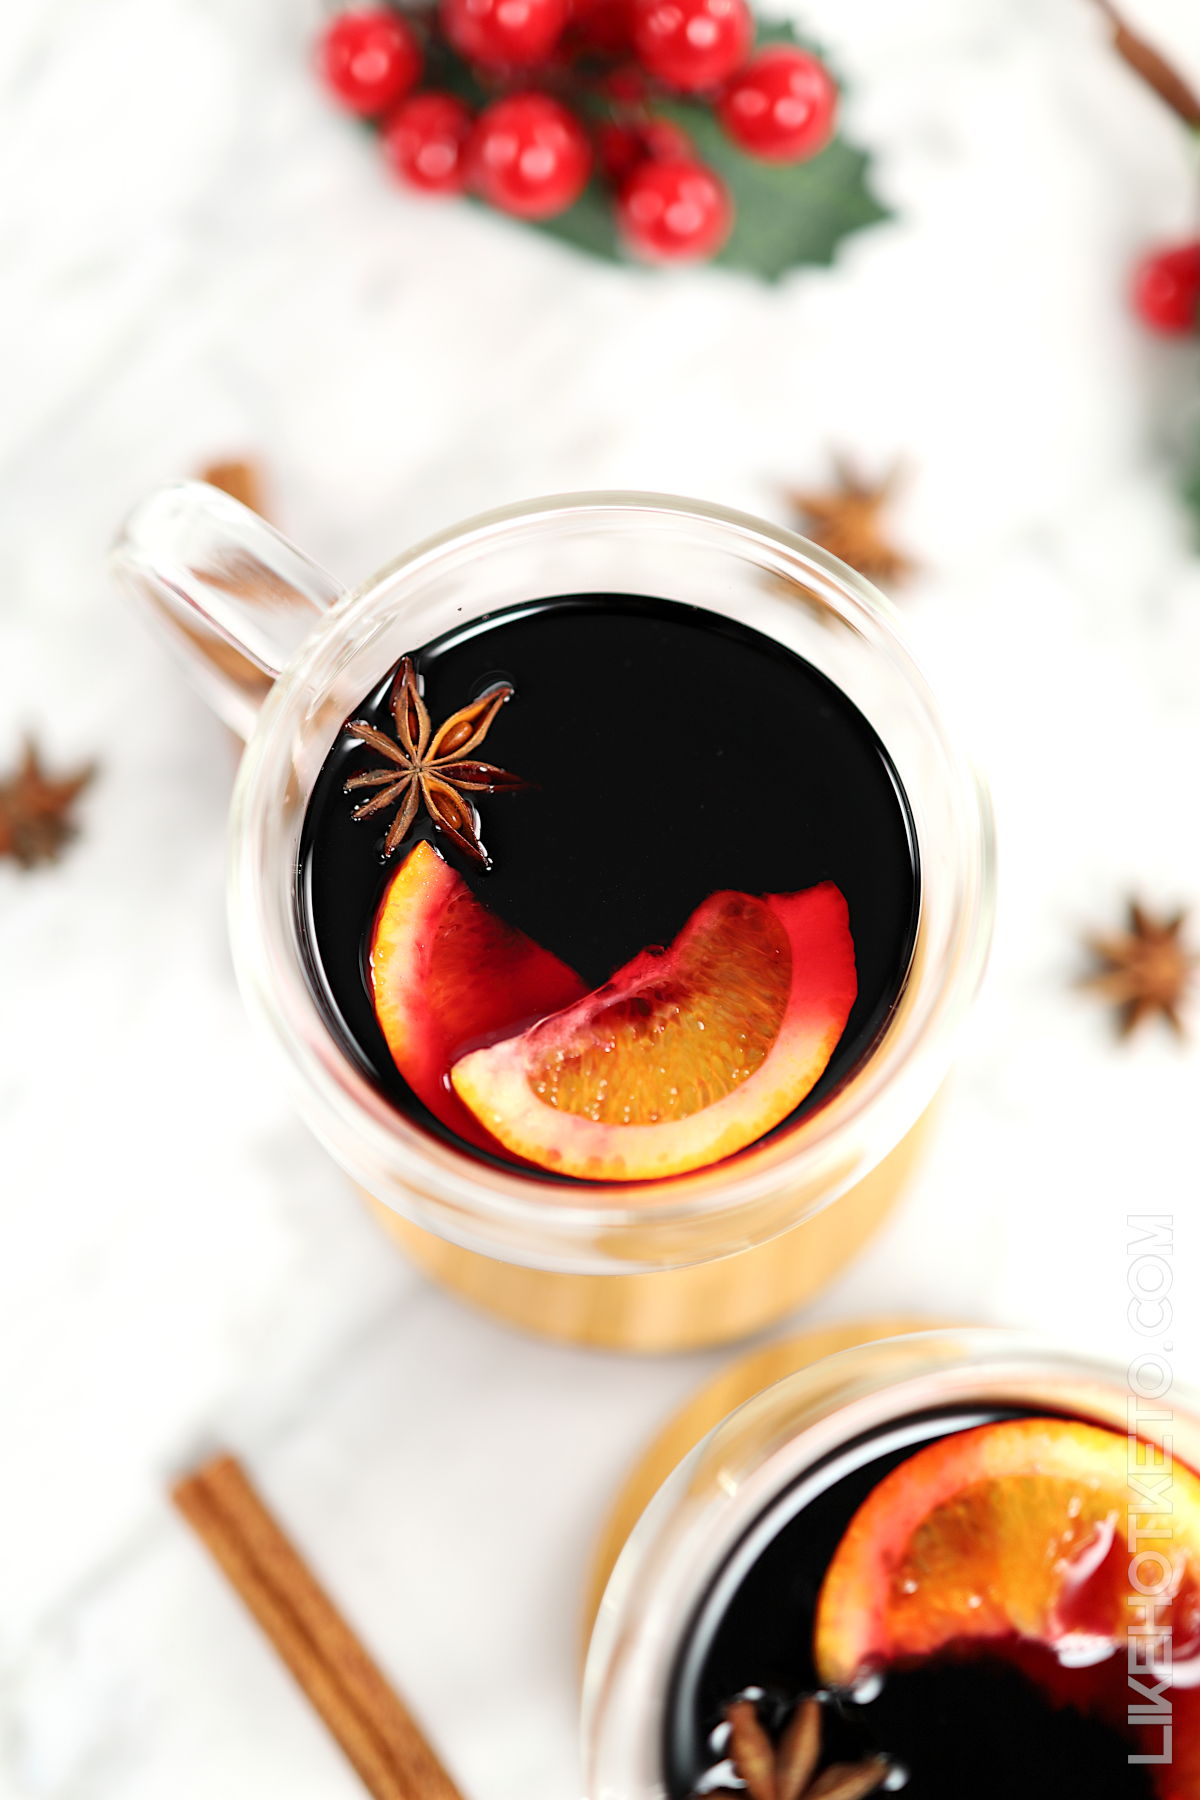 Cups of mulled wine with oranges, cinnamon and star anise and Christmas decorations on the background.